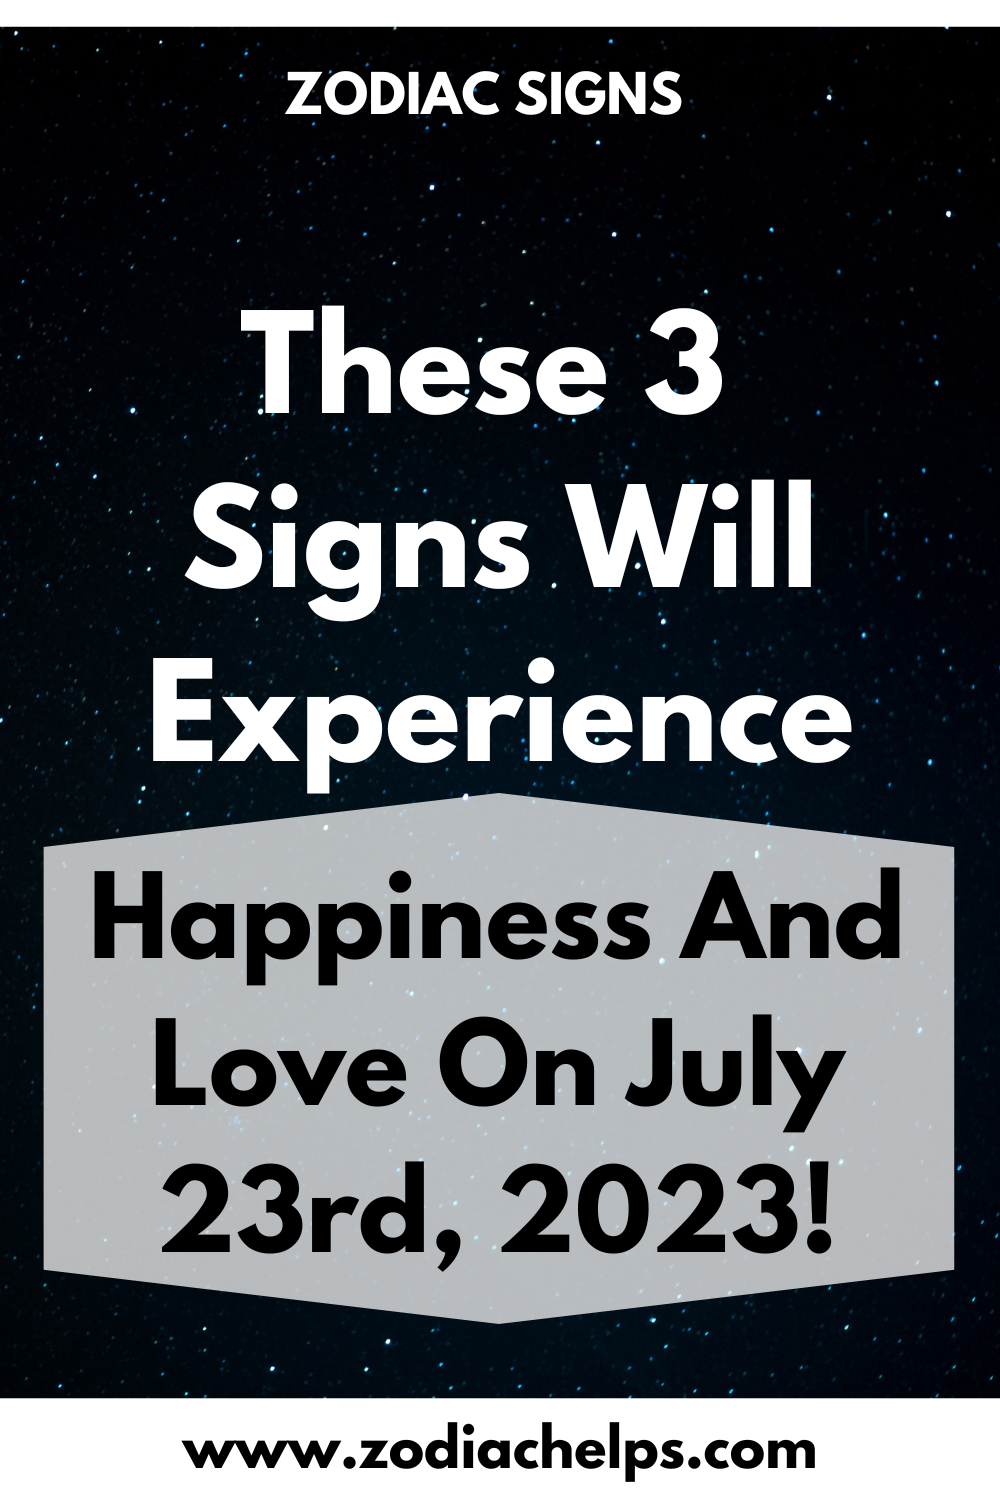 These 3 Signs Will Experience Happiness And Love On July 23rd, 2023!